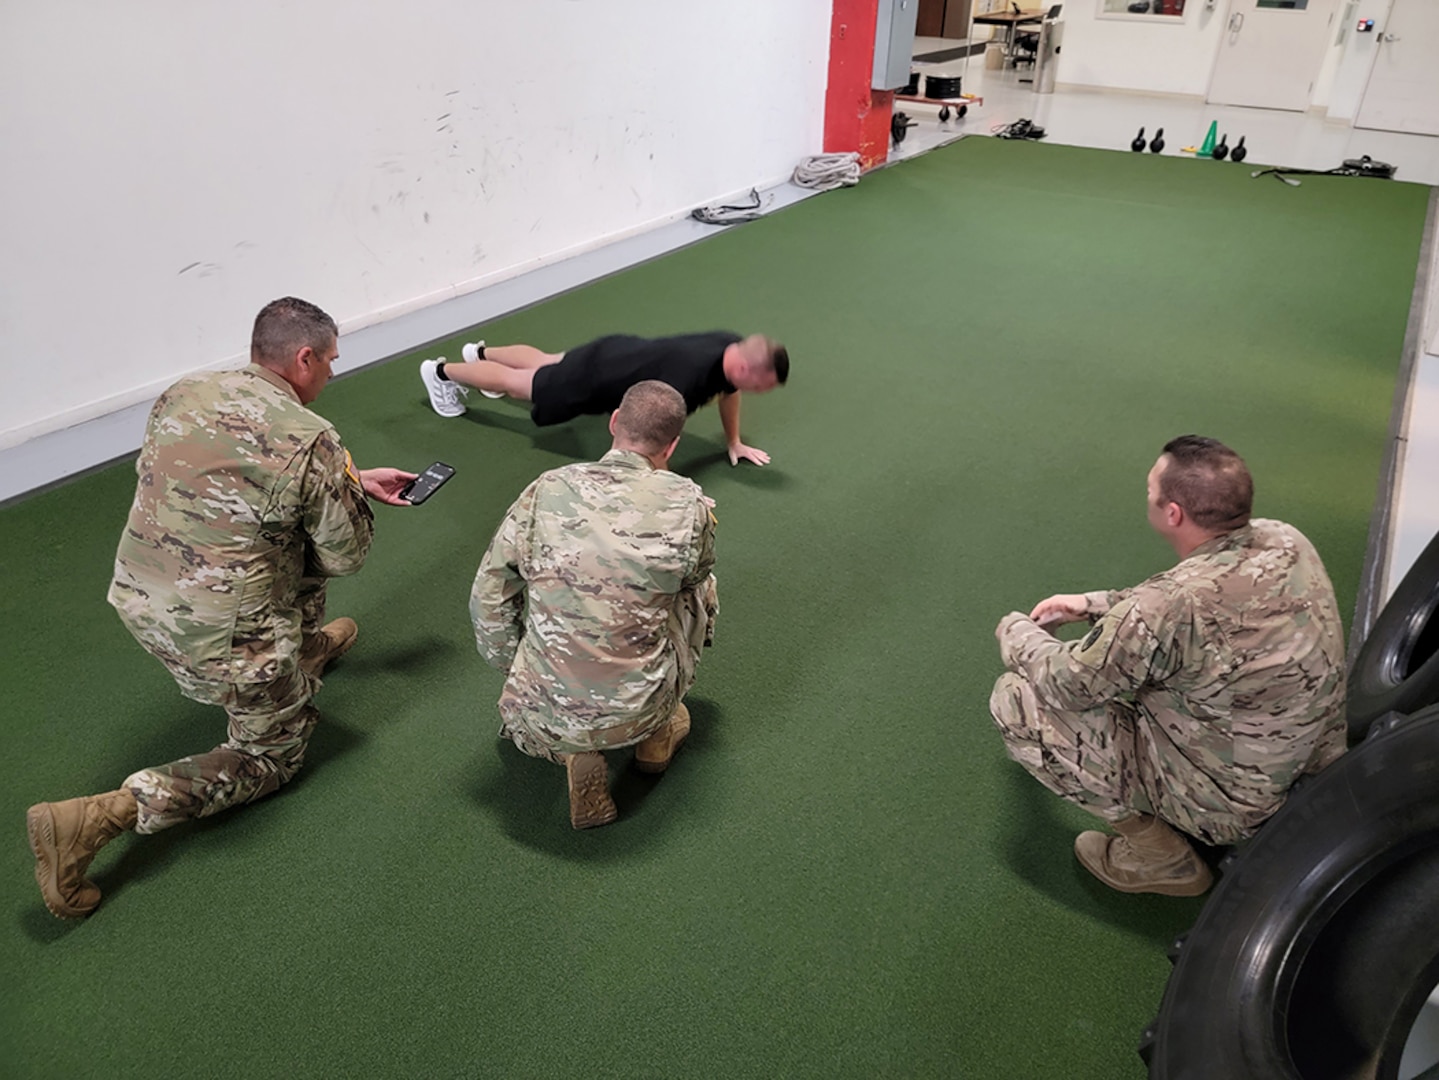 People in Army OCP uniforms watch another person in black fitness gear do a push-up.